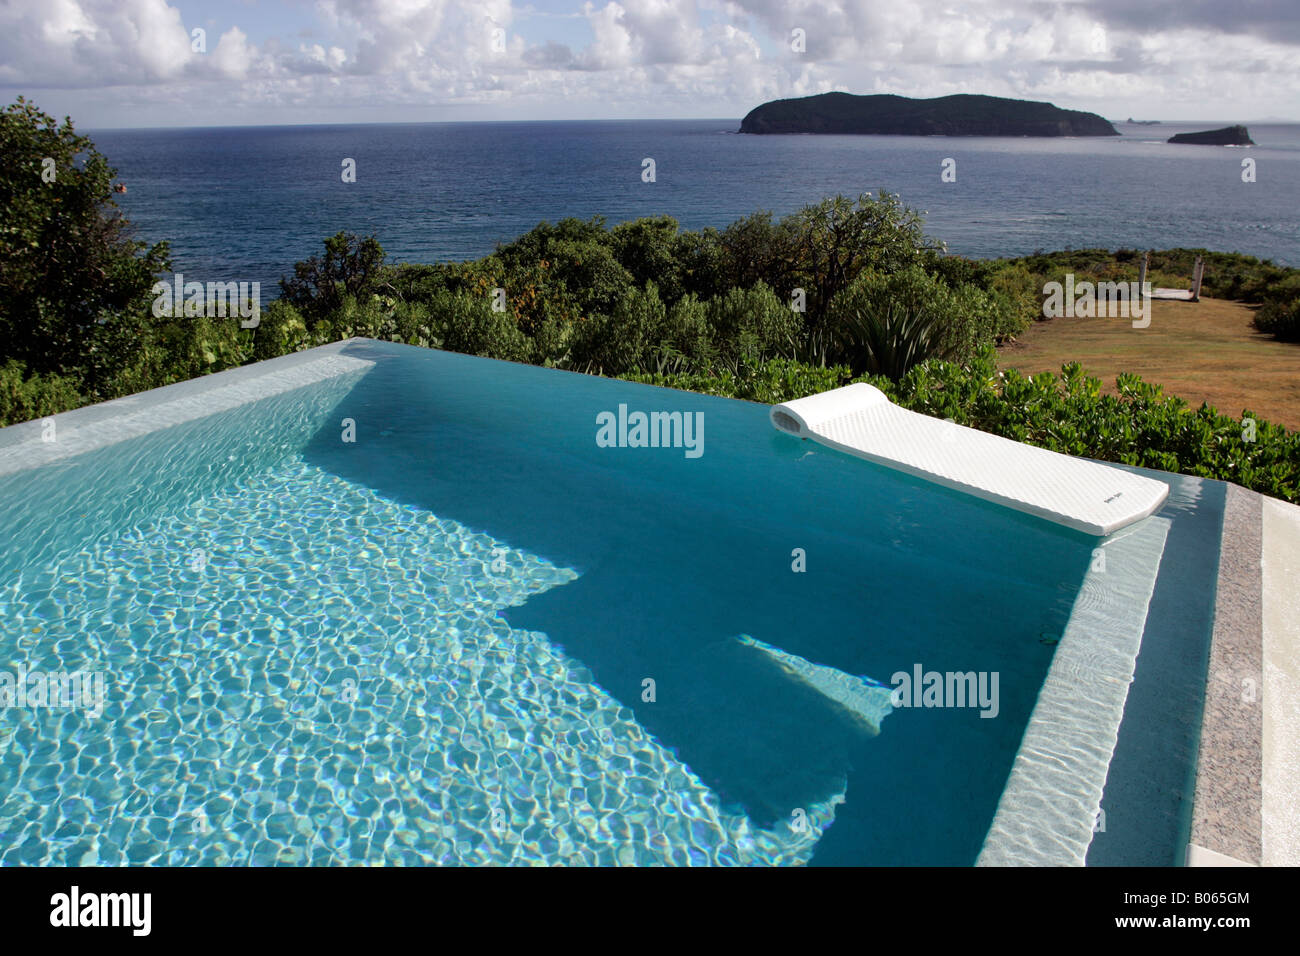 The infinity pool at Princess Margaret's former villa, Les Jolies Eaux, on the island of Mustique. Stock Photo